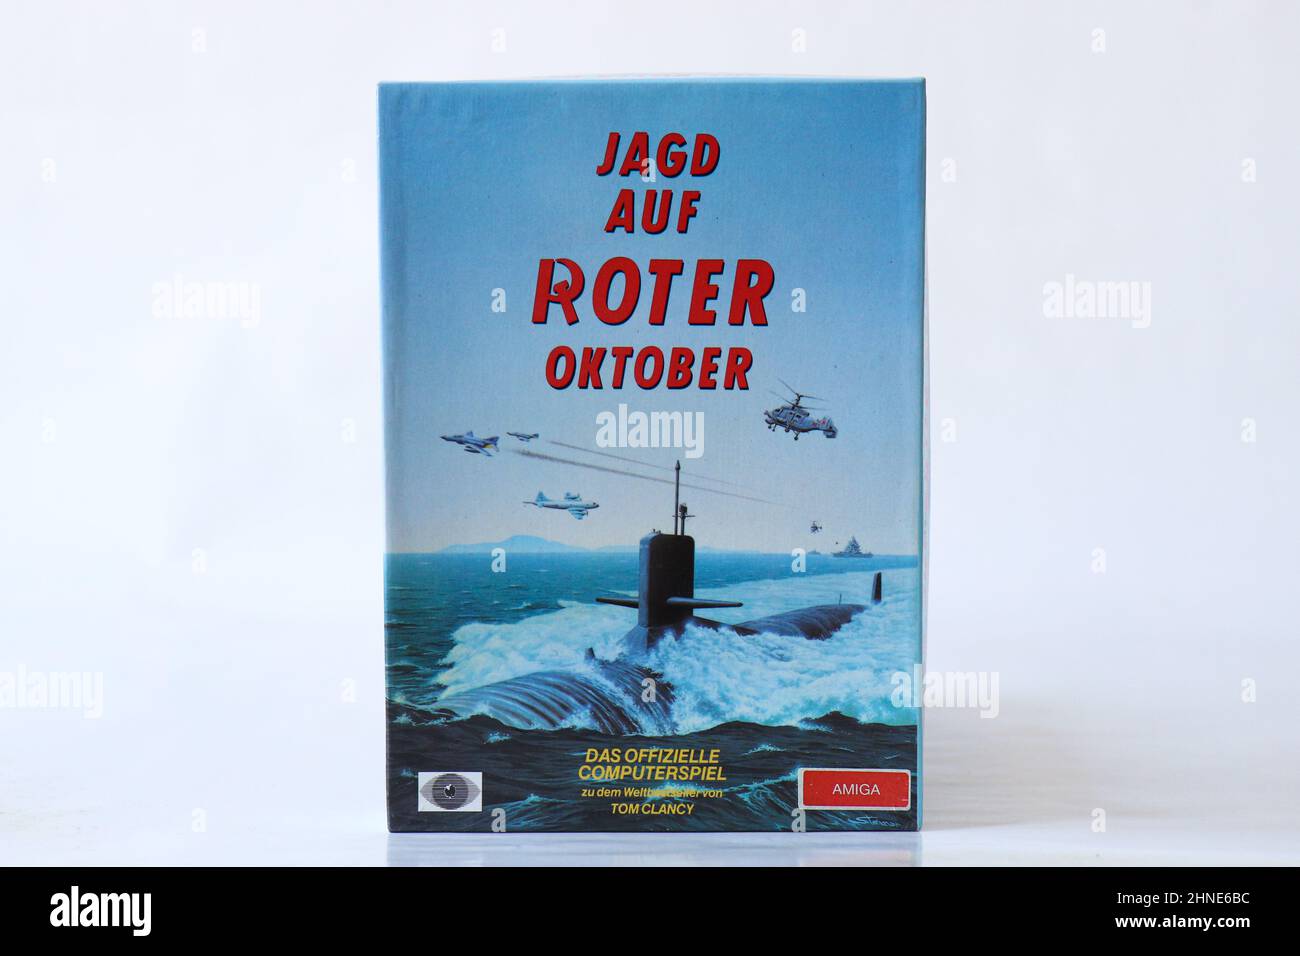 BERLIN - FEBRUARY 12, 2022: Vintage Retro Video Game JAGD AUF ROTER OKTOBER for the Commodore Amiga on Floppy Disks. German version of HUNT FOR RED OC Stock Photo